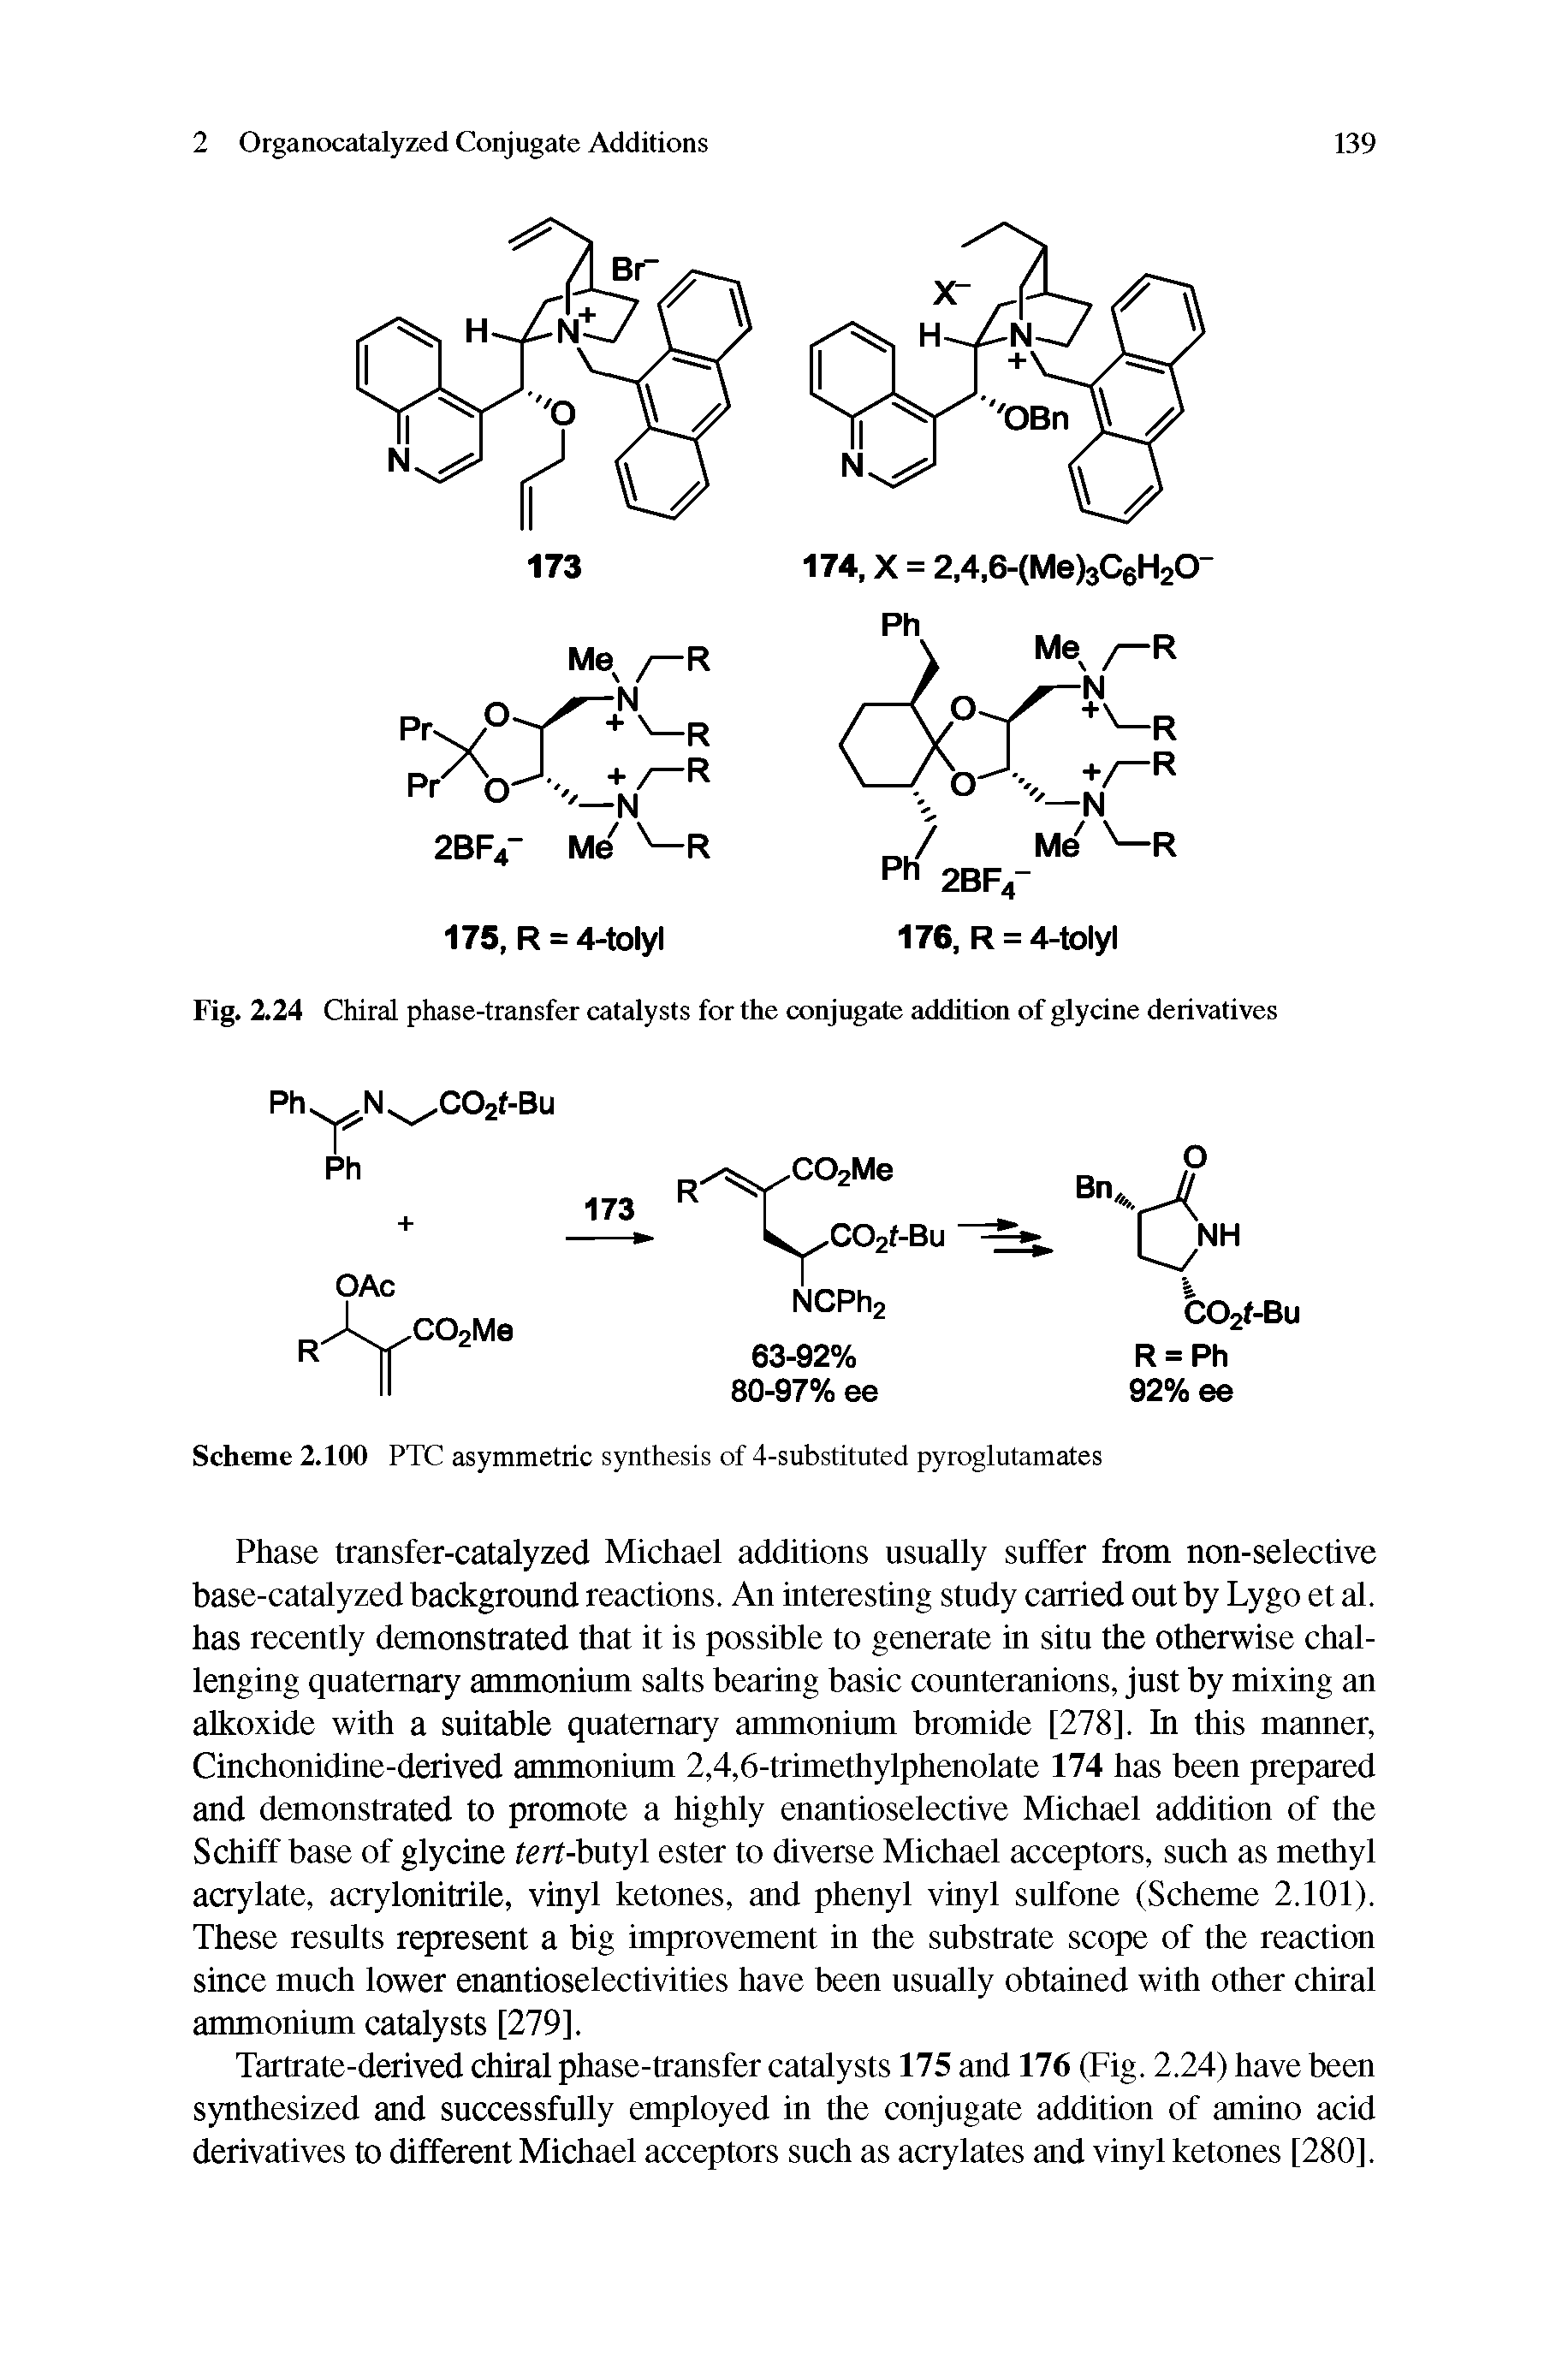 Fig. 2.24 Chiral phase-transfer catalysts for the conjugate addition of glycine derivatives...